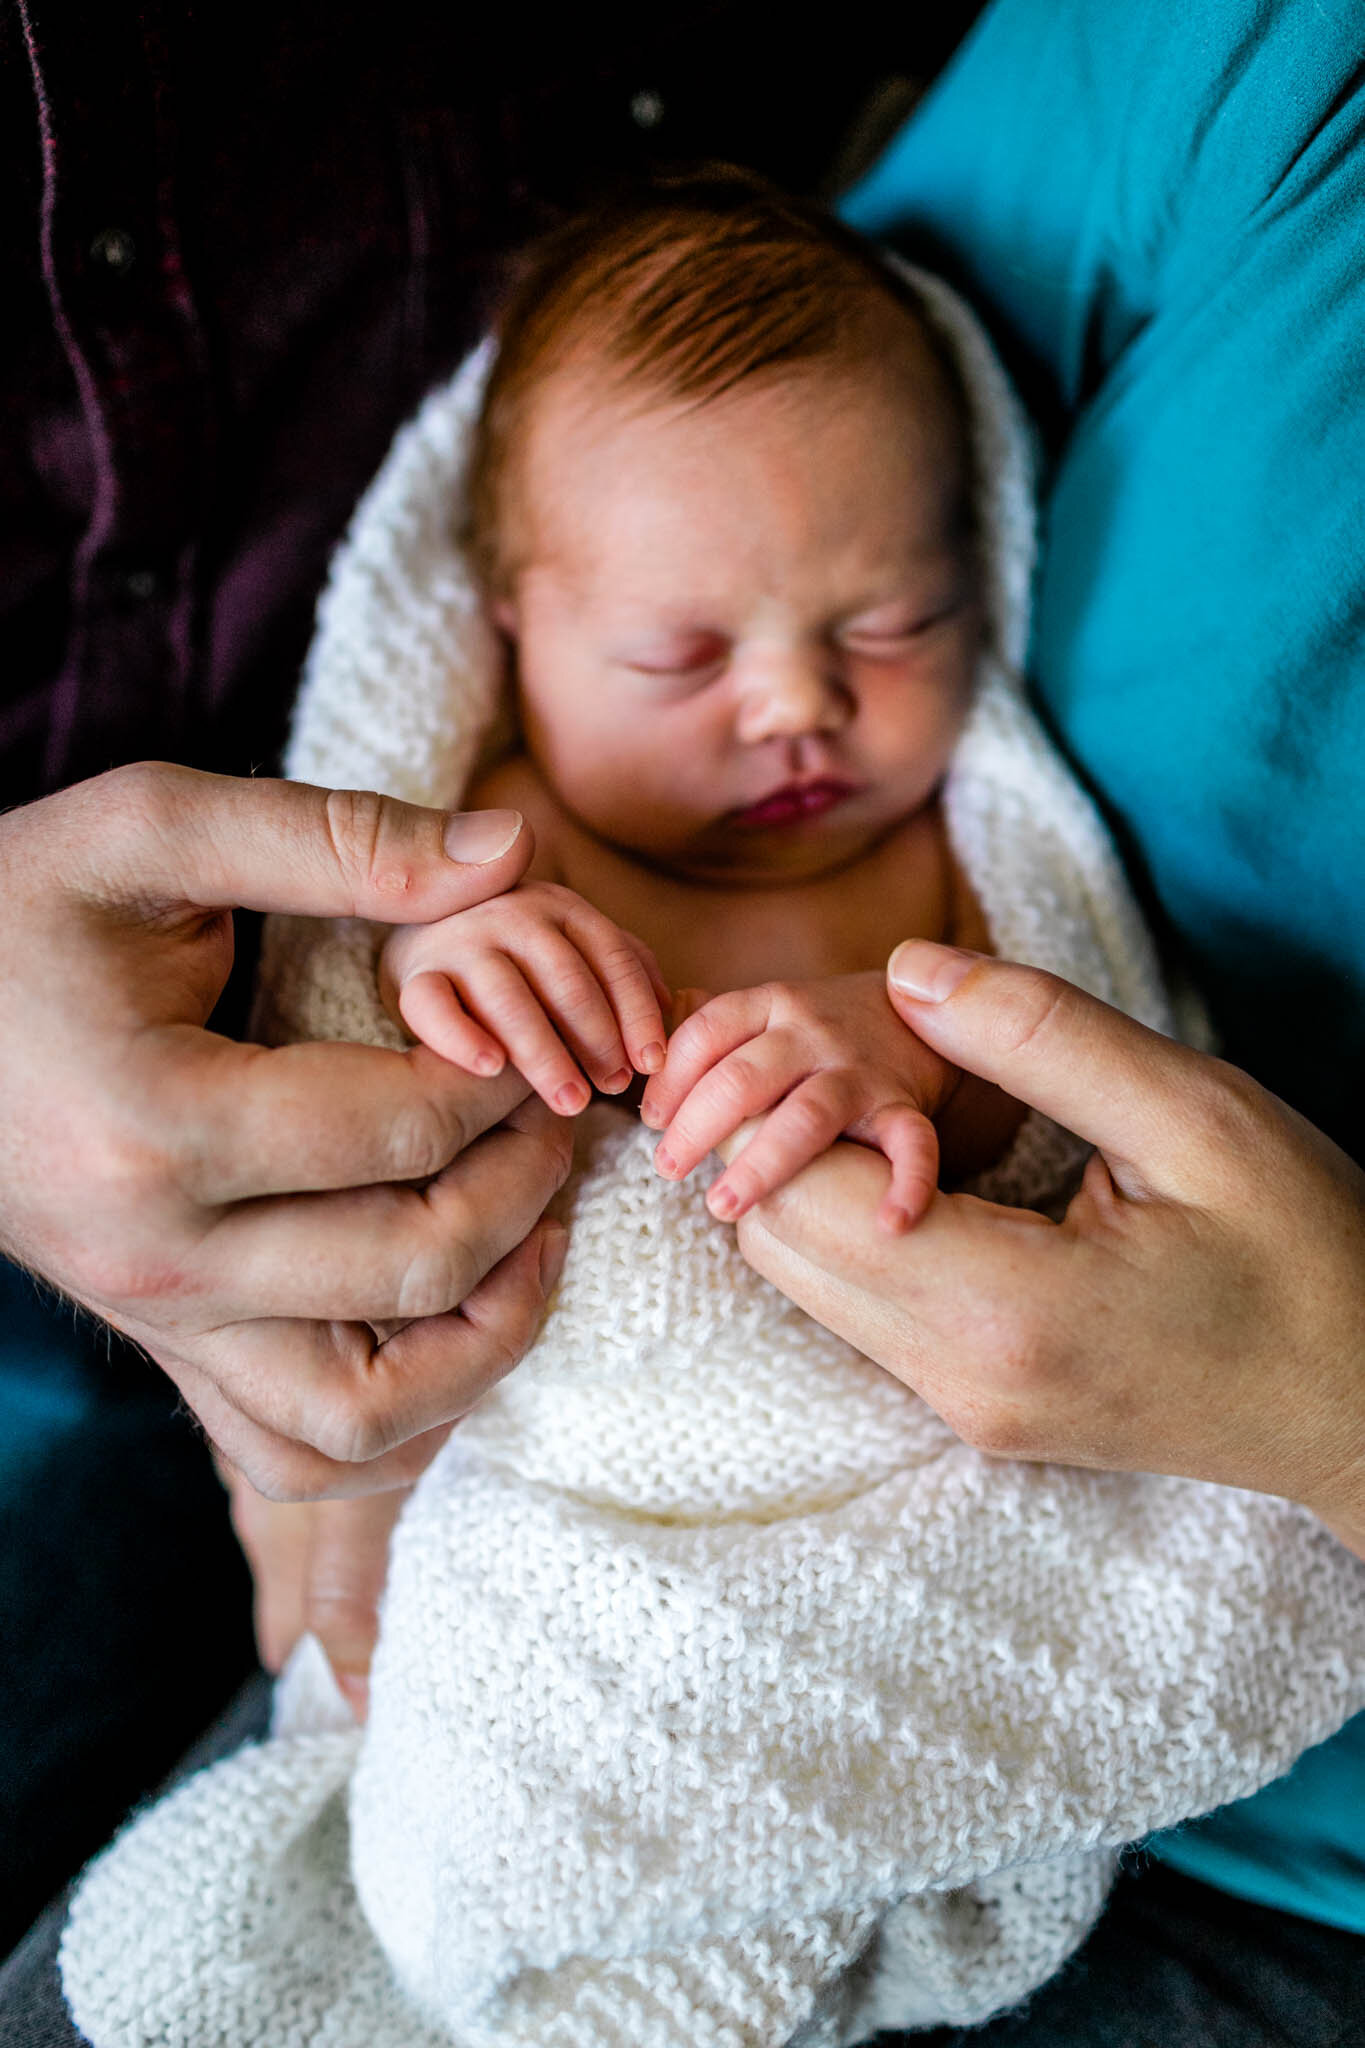 Durham Newborn Photographer | By G. Lin Photography | Close up of newborn baby and baby hands